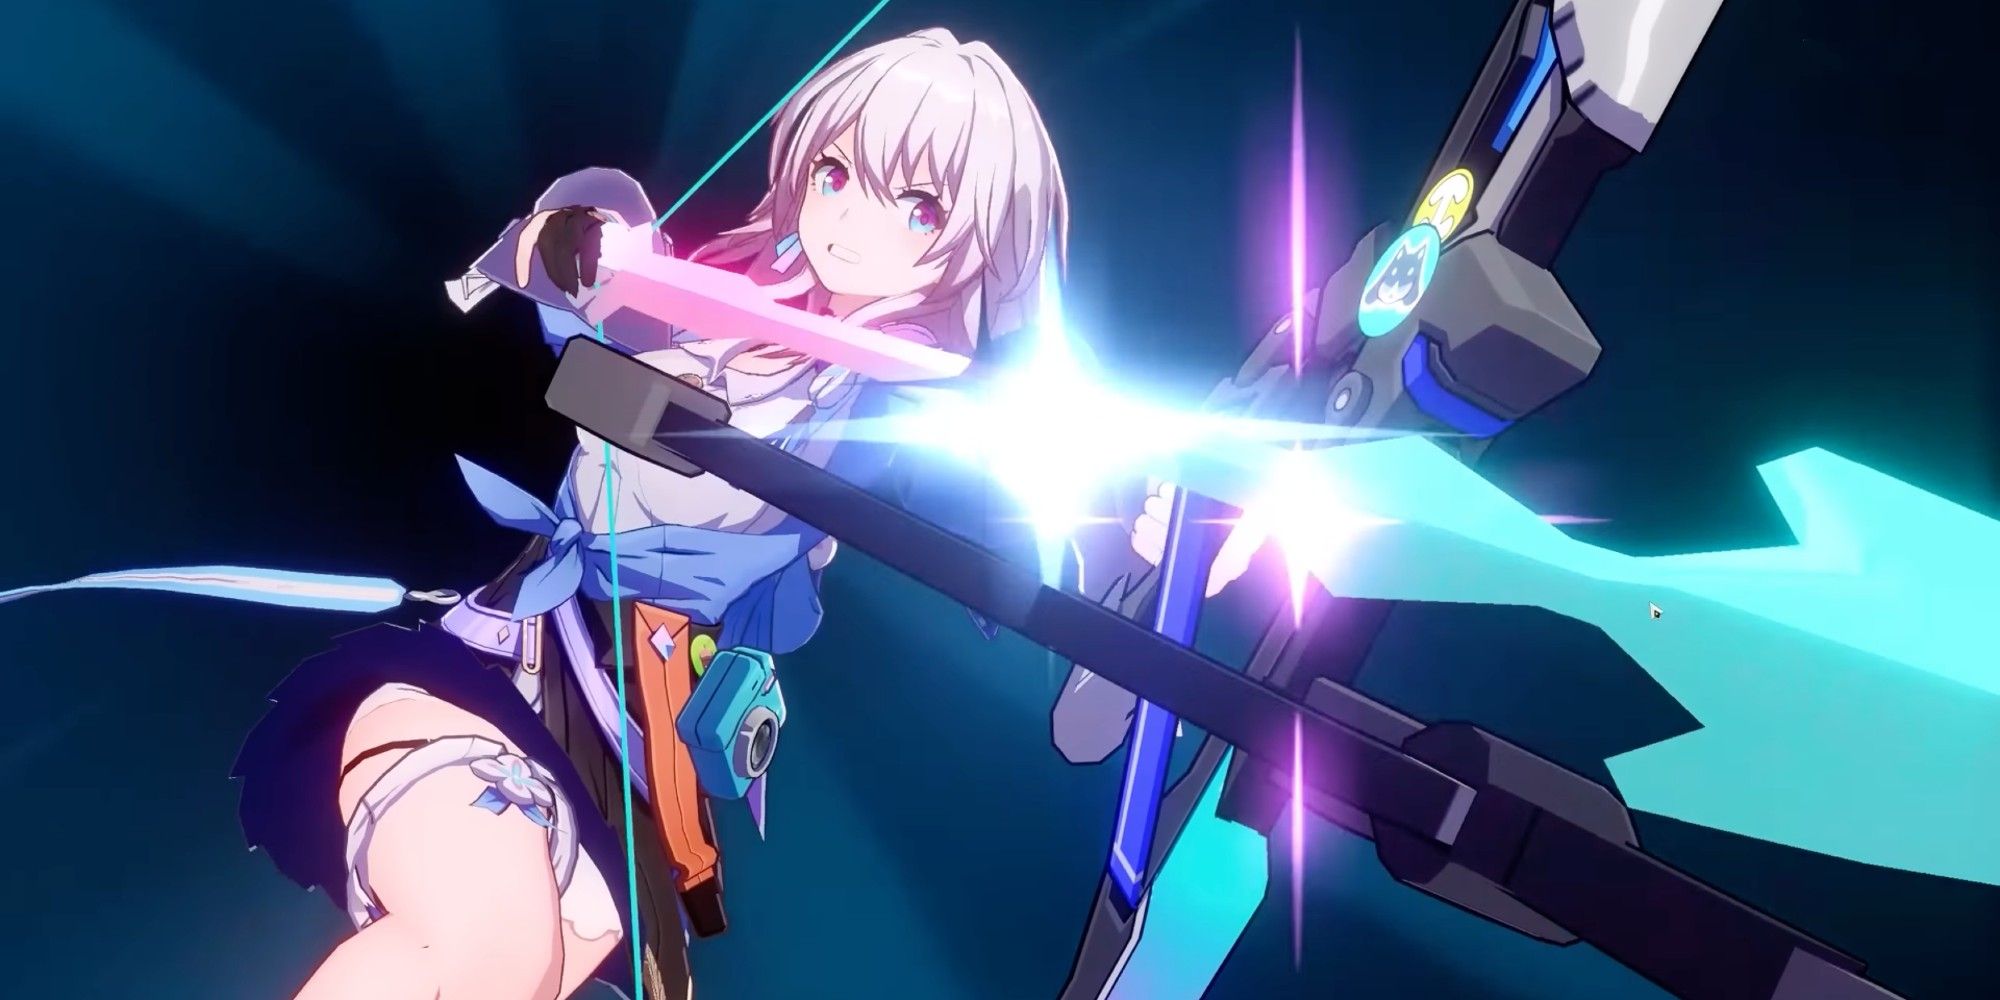 March 7th aims her arrow at the enemy field in Honkai: Star Rail.